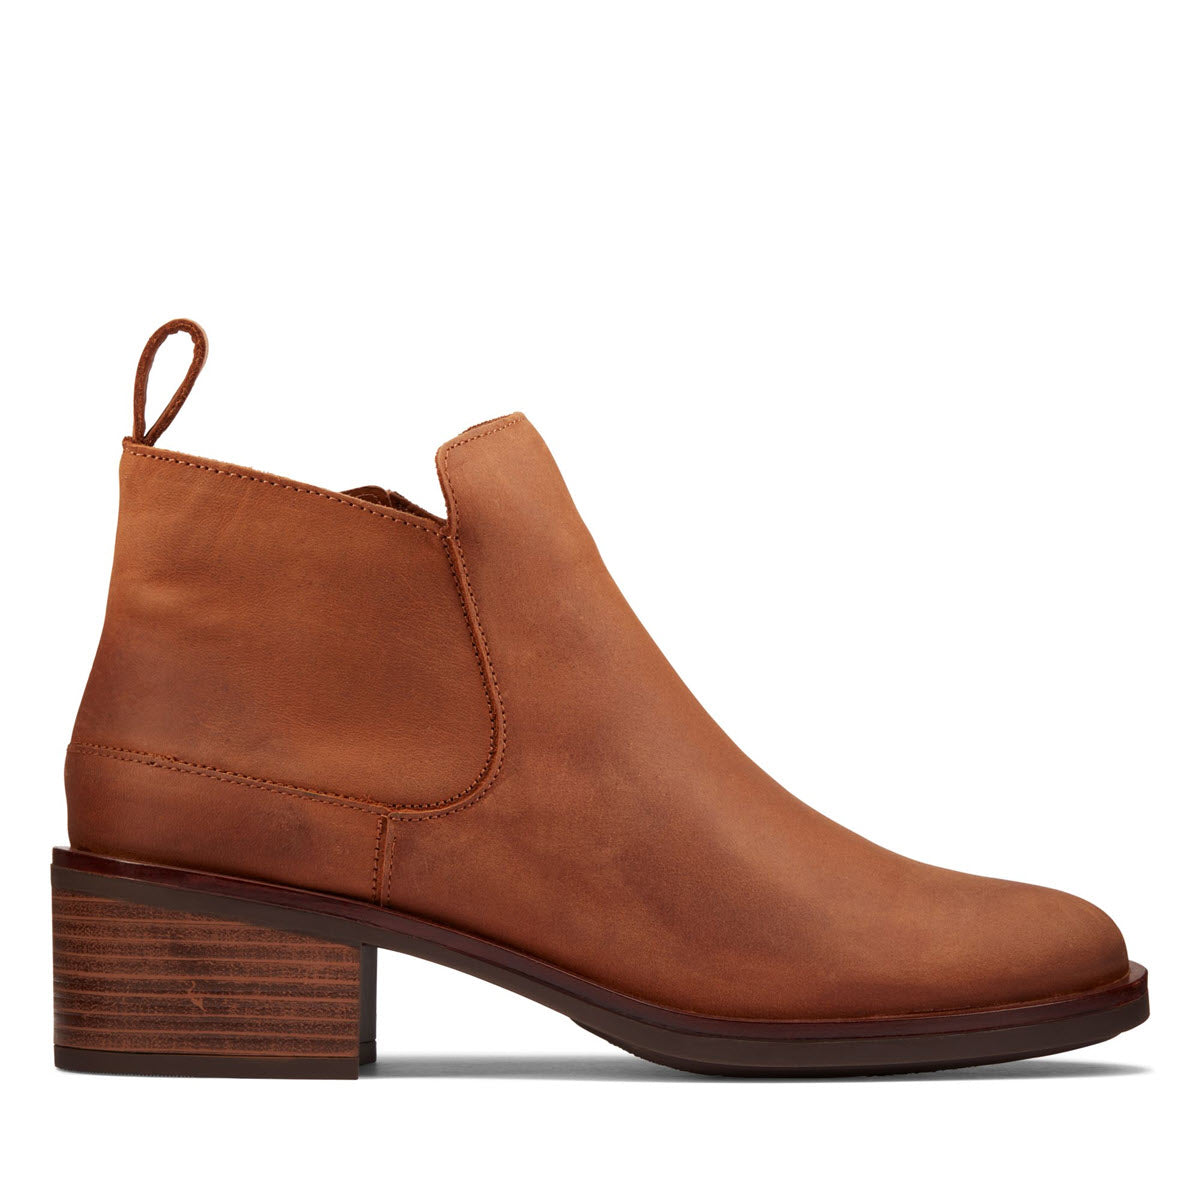 A Clarks brown leather chelsea ankle boot with a low block heel and Cushion Plus footbed.